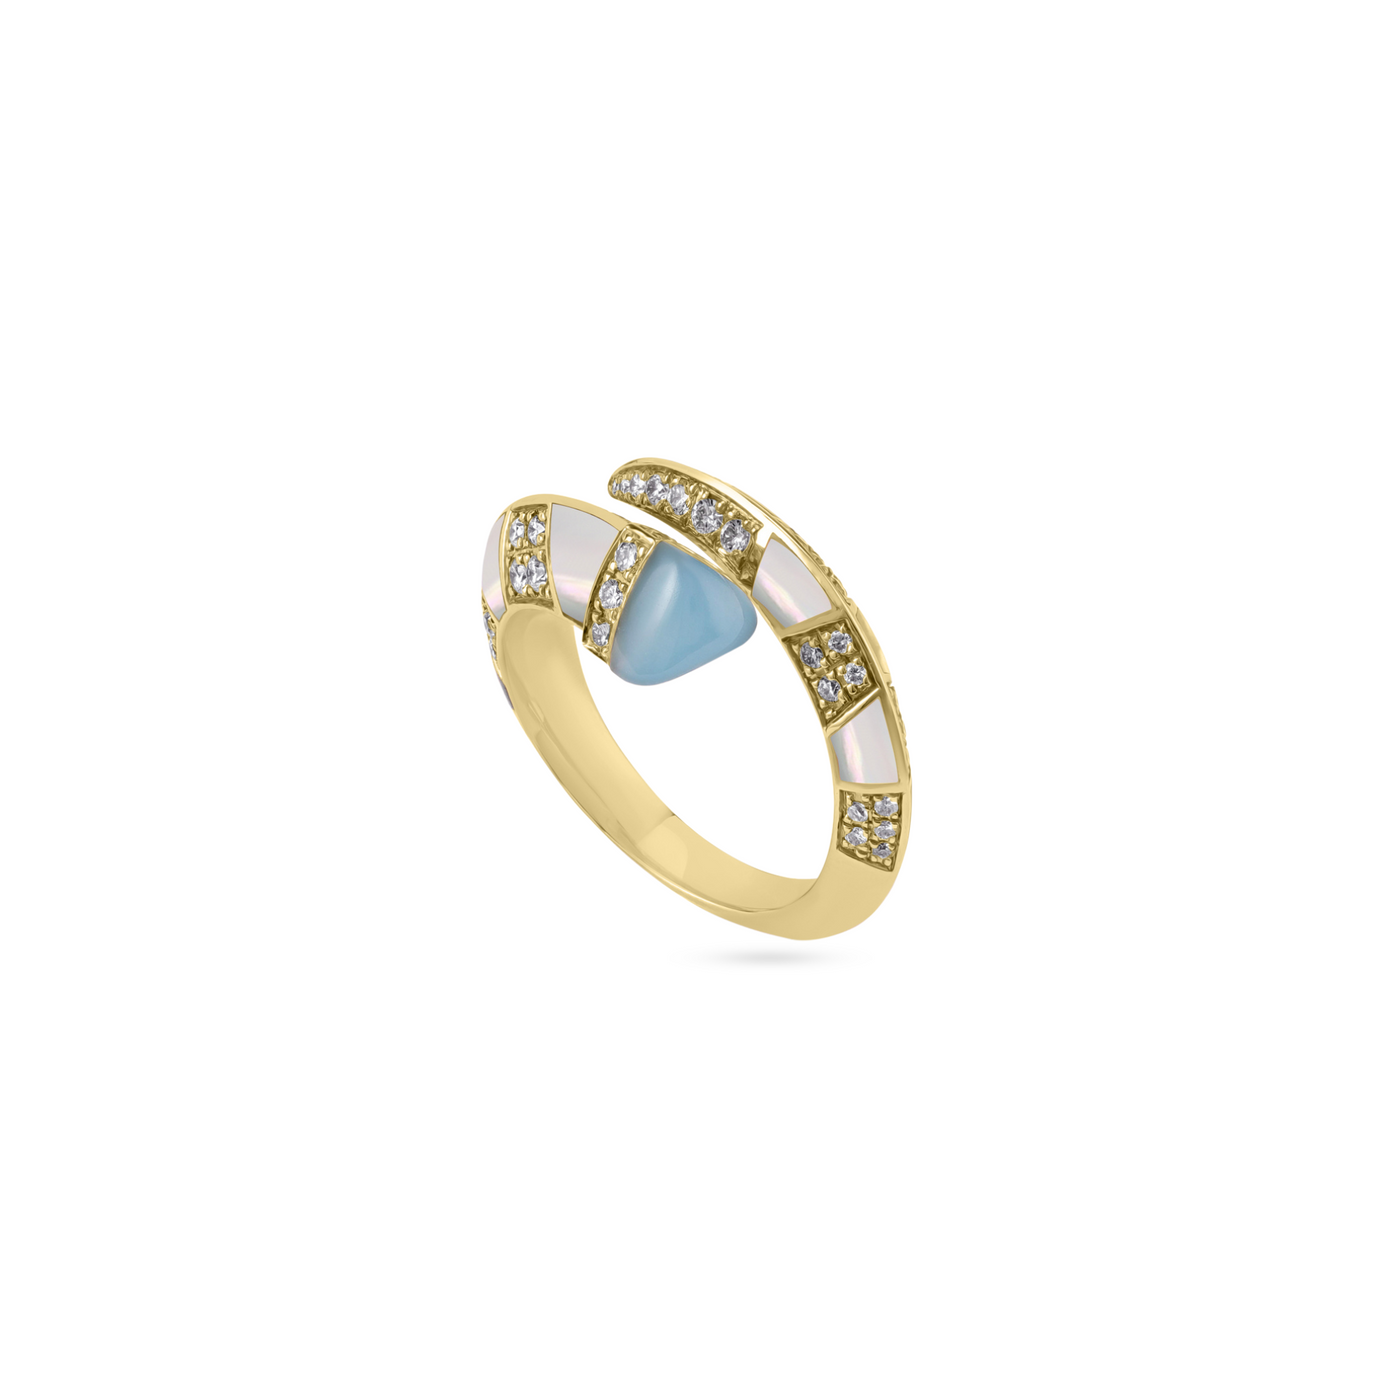 ARTISTRY Yellow Gold Diamond Ring With Natural Chalcedony